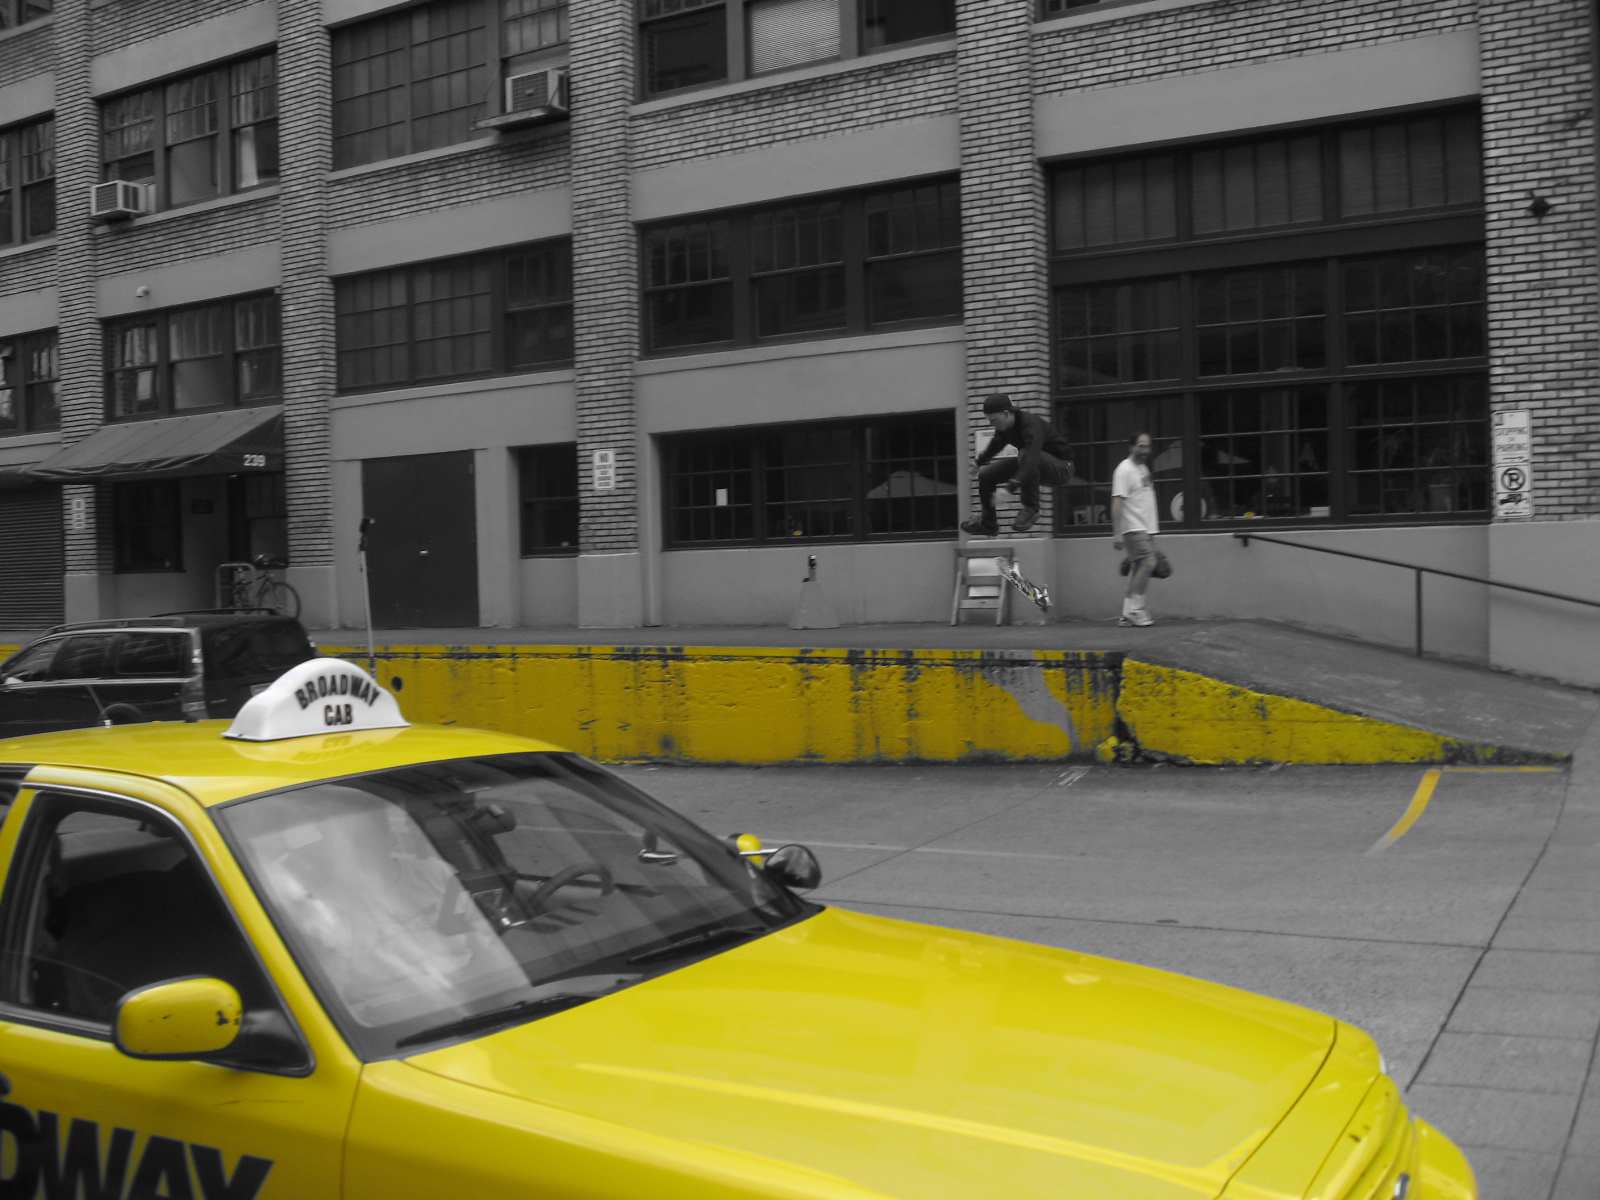 two people skateboard across a parking lot, next to a yellow taxi